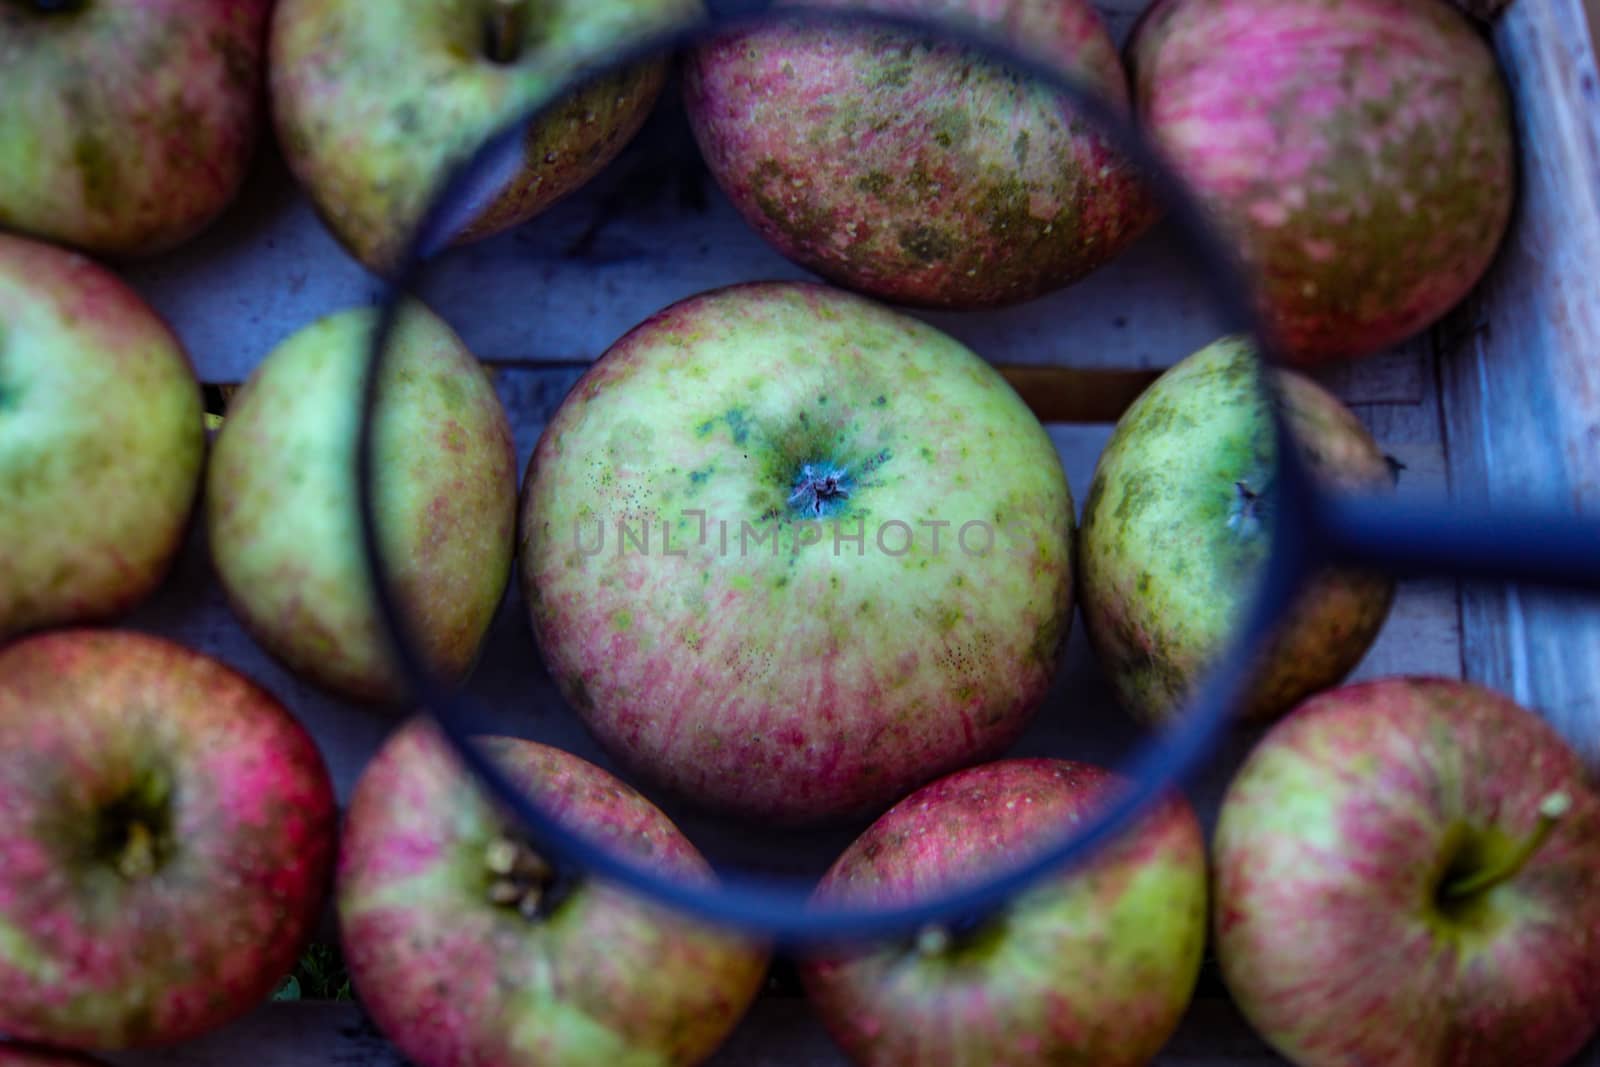 One apple enlarged compared to the others in the crate where the other apples are stacked. An apple magnified with a magnifying glass inside a wooden crate. by mahirrov